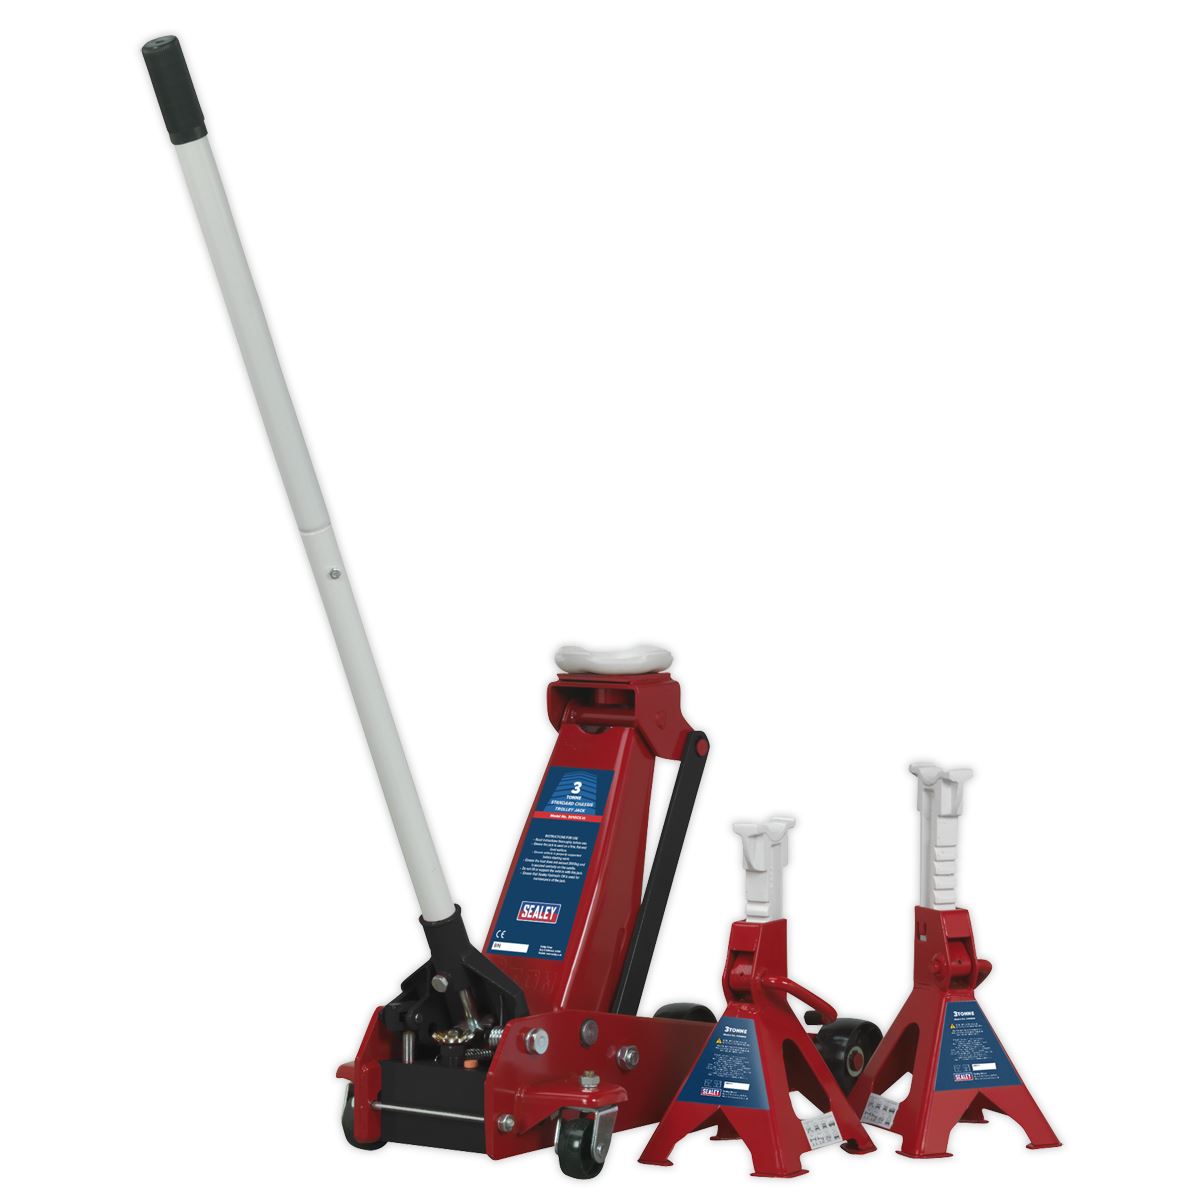 Sealey Trolley Jack 3 Tonne Standard Chassis with Axle Stands (Pair) 3 Tonne Capacity per Stand